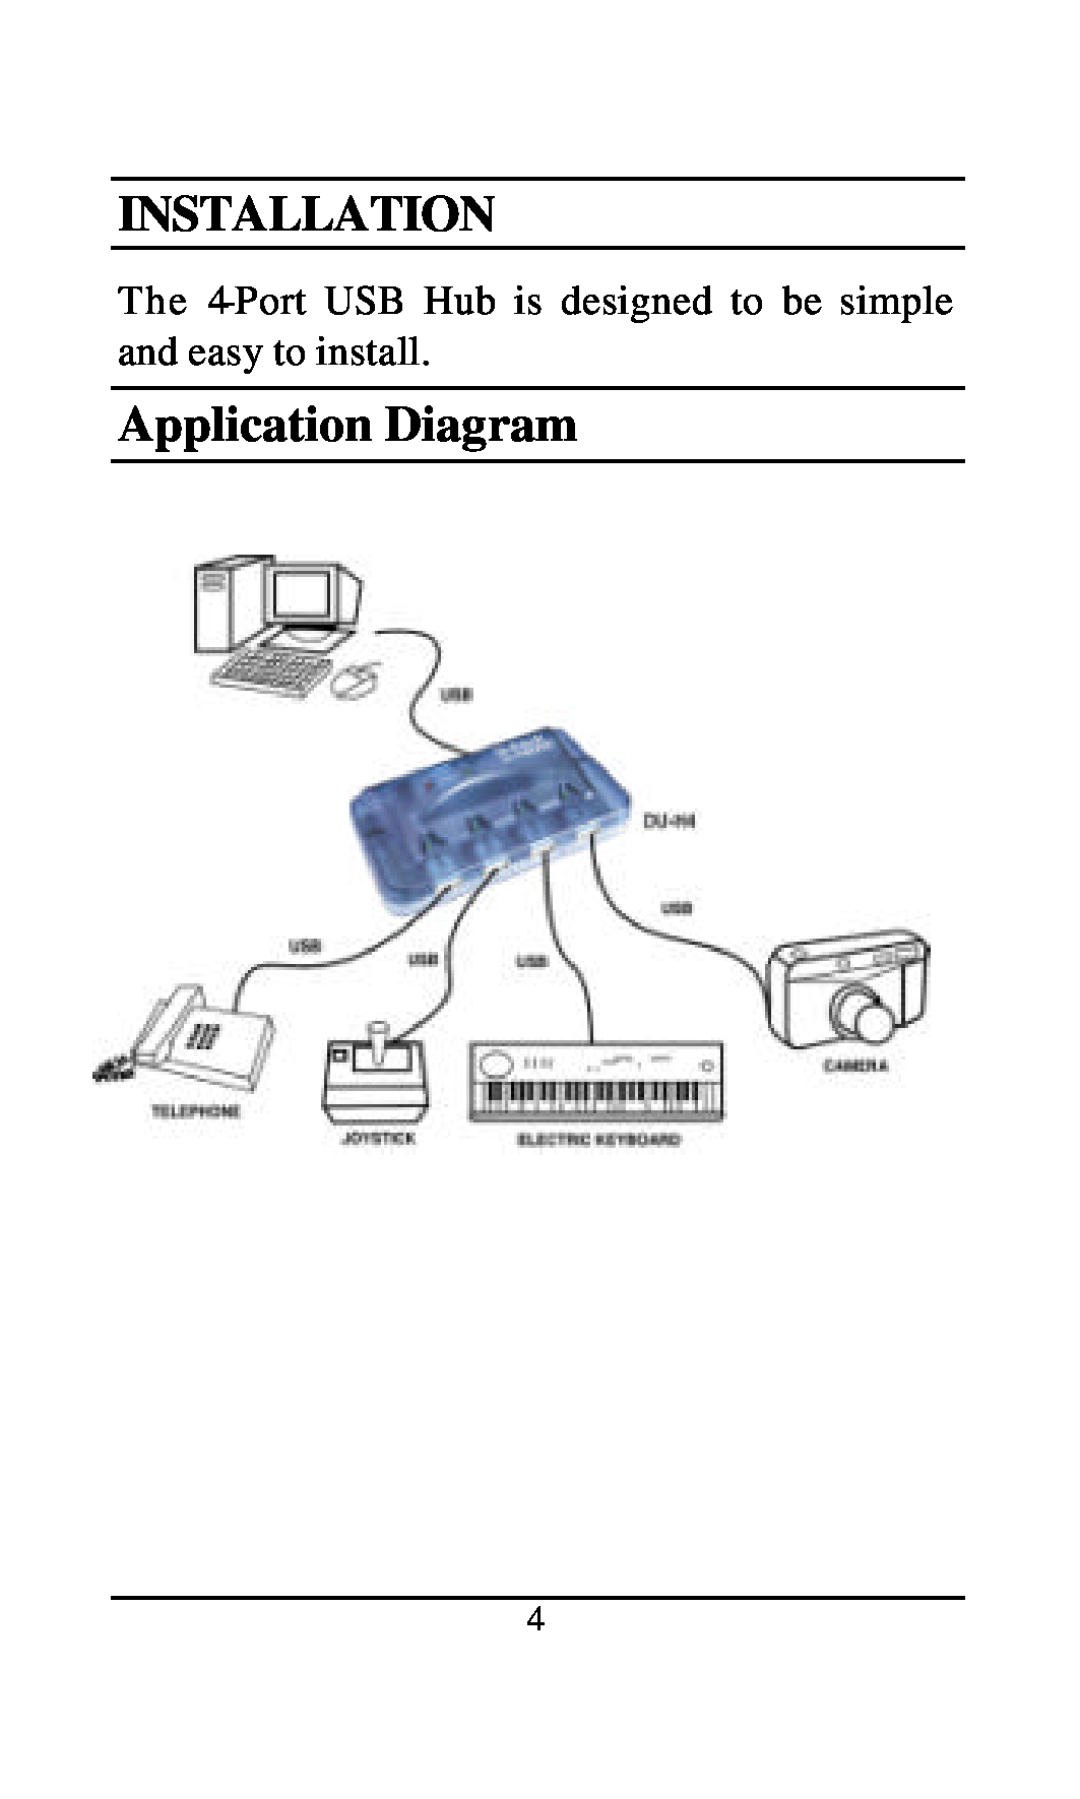 D-Link DU-H4 user manual Installation, Application Diagram, The 4-Port USB Hub is designed to be simple and easy to install 